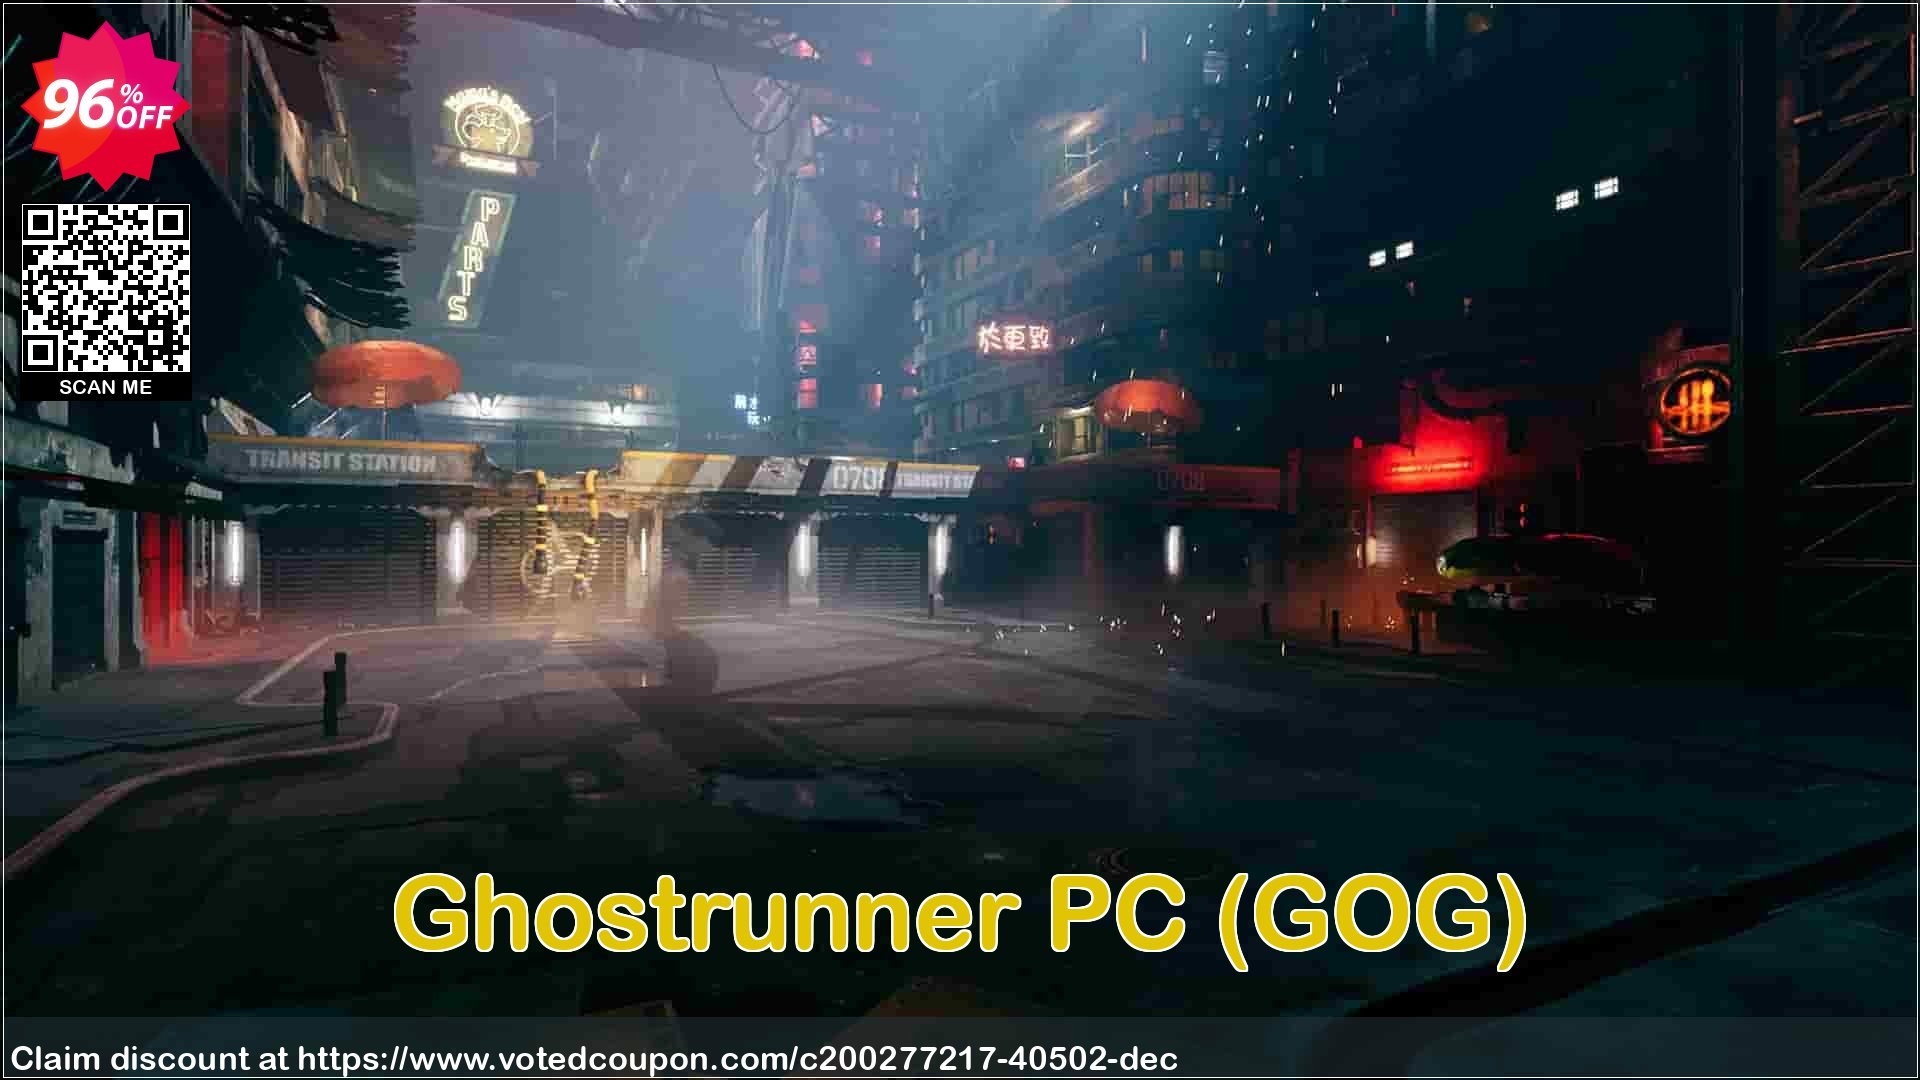 Ghostrunner PC, GOG  Coupon Code May 2024, 96% OFF - VotedCoupon